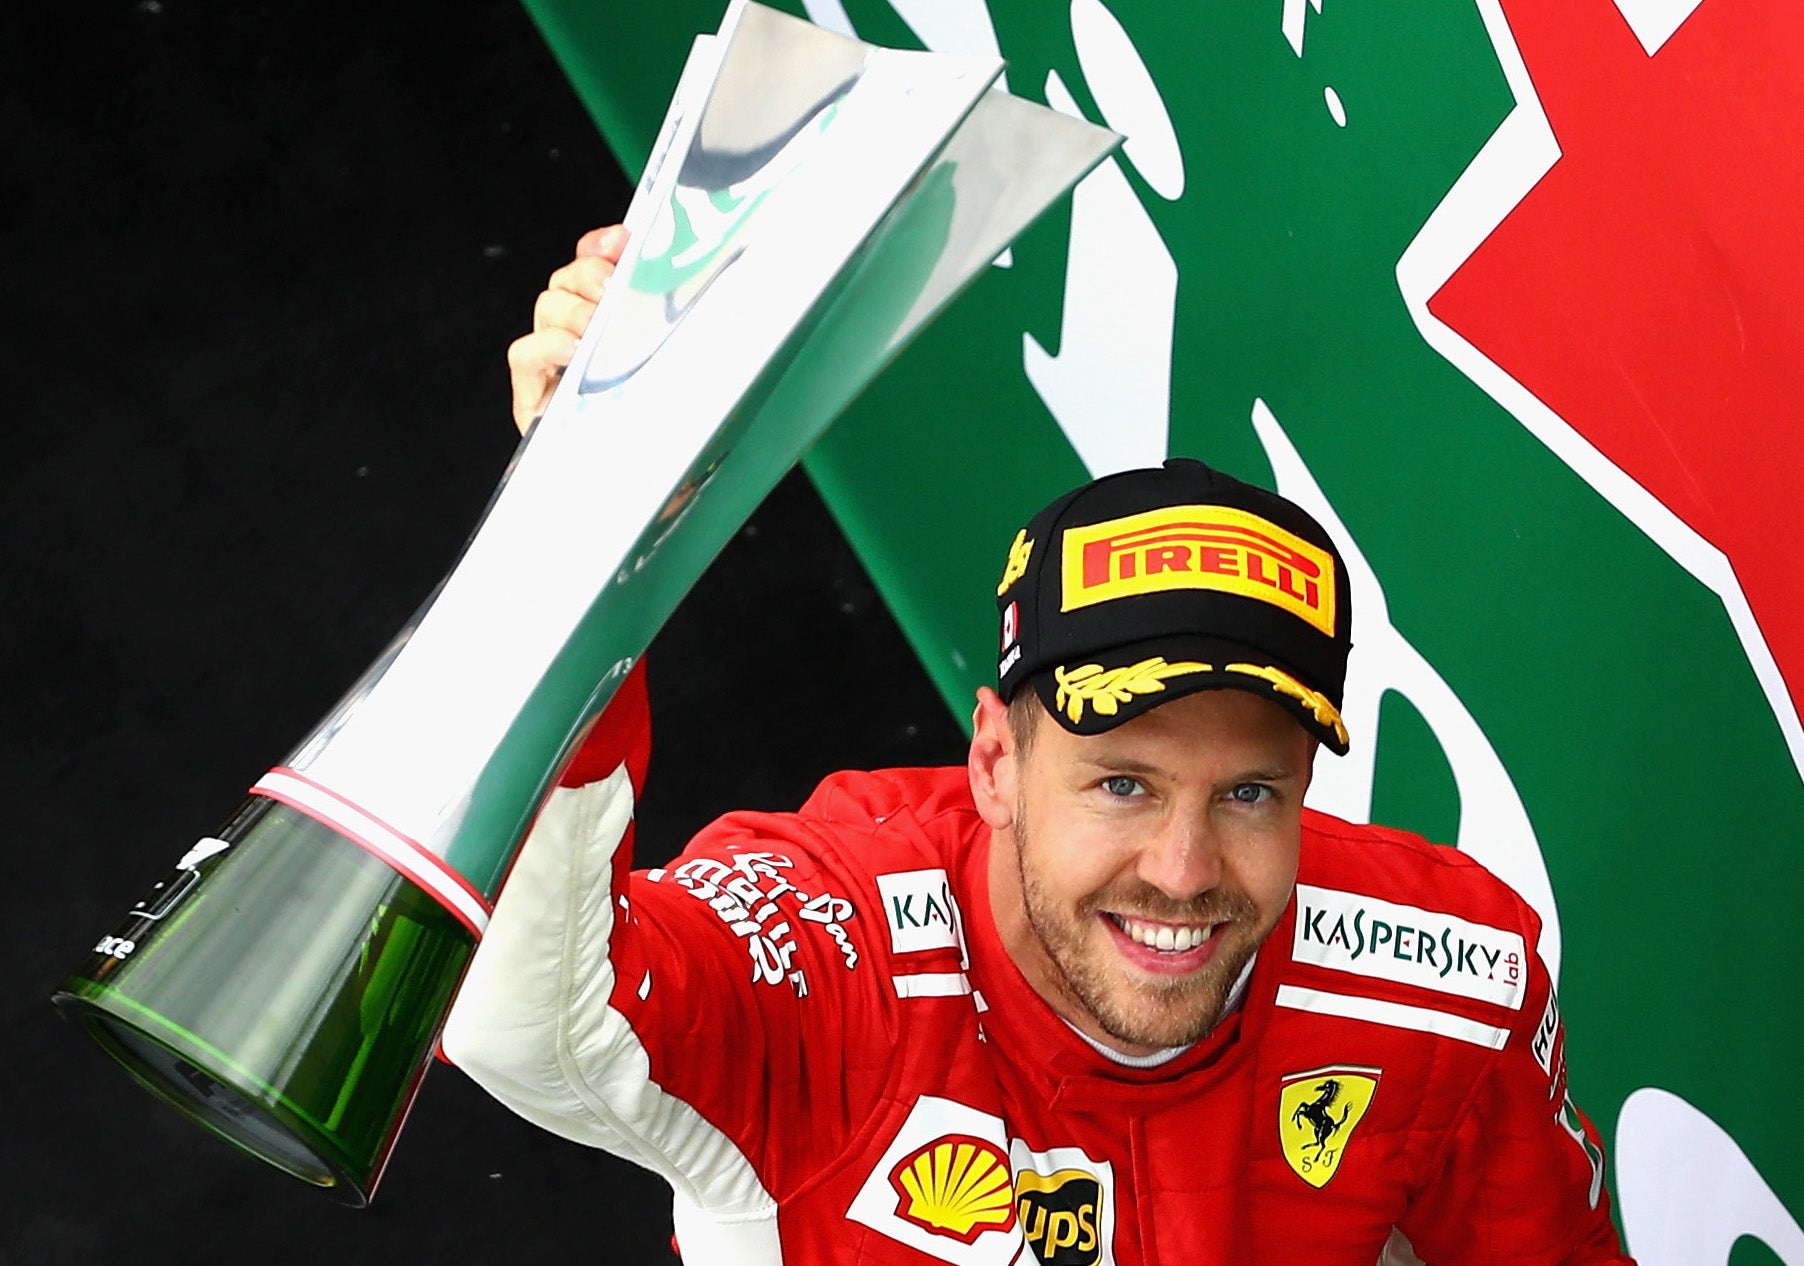 Sebastian Vettel ruled from lights-to-flag at the Circuit Gilles Villeneuve in an emphatic display as he crossed the line ahead of Valtteri Bottas